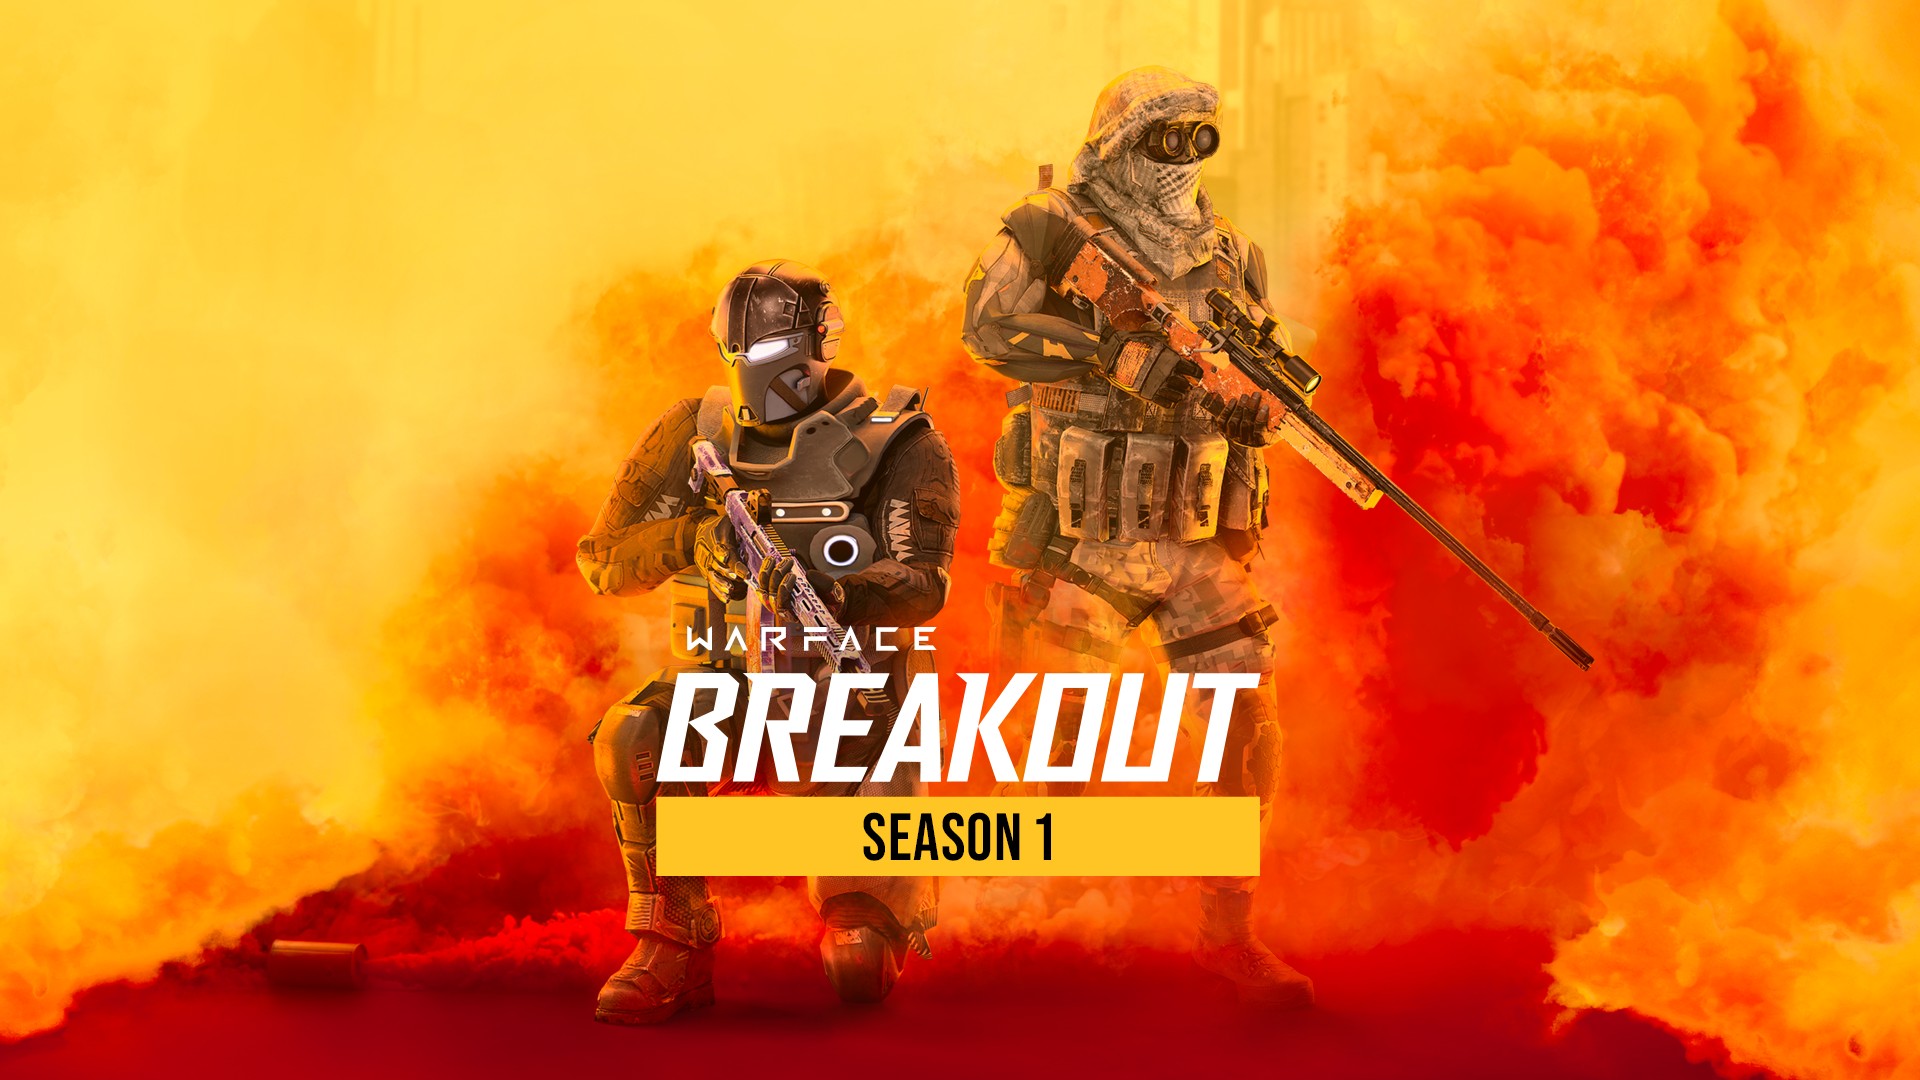 Video For Climb the Ranks in Season 1 of Warface: Breakout, Available Now